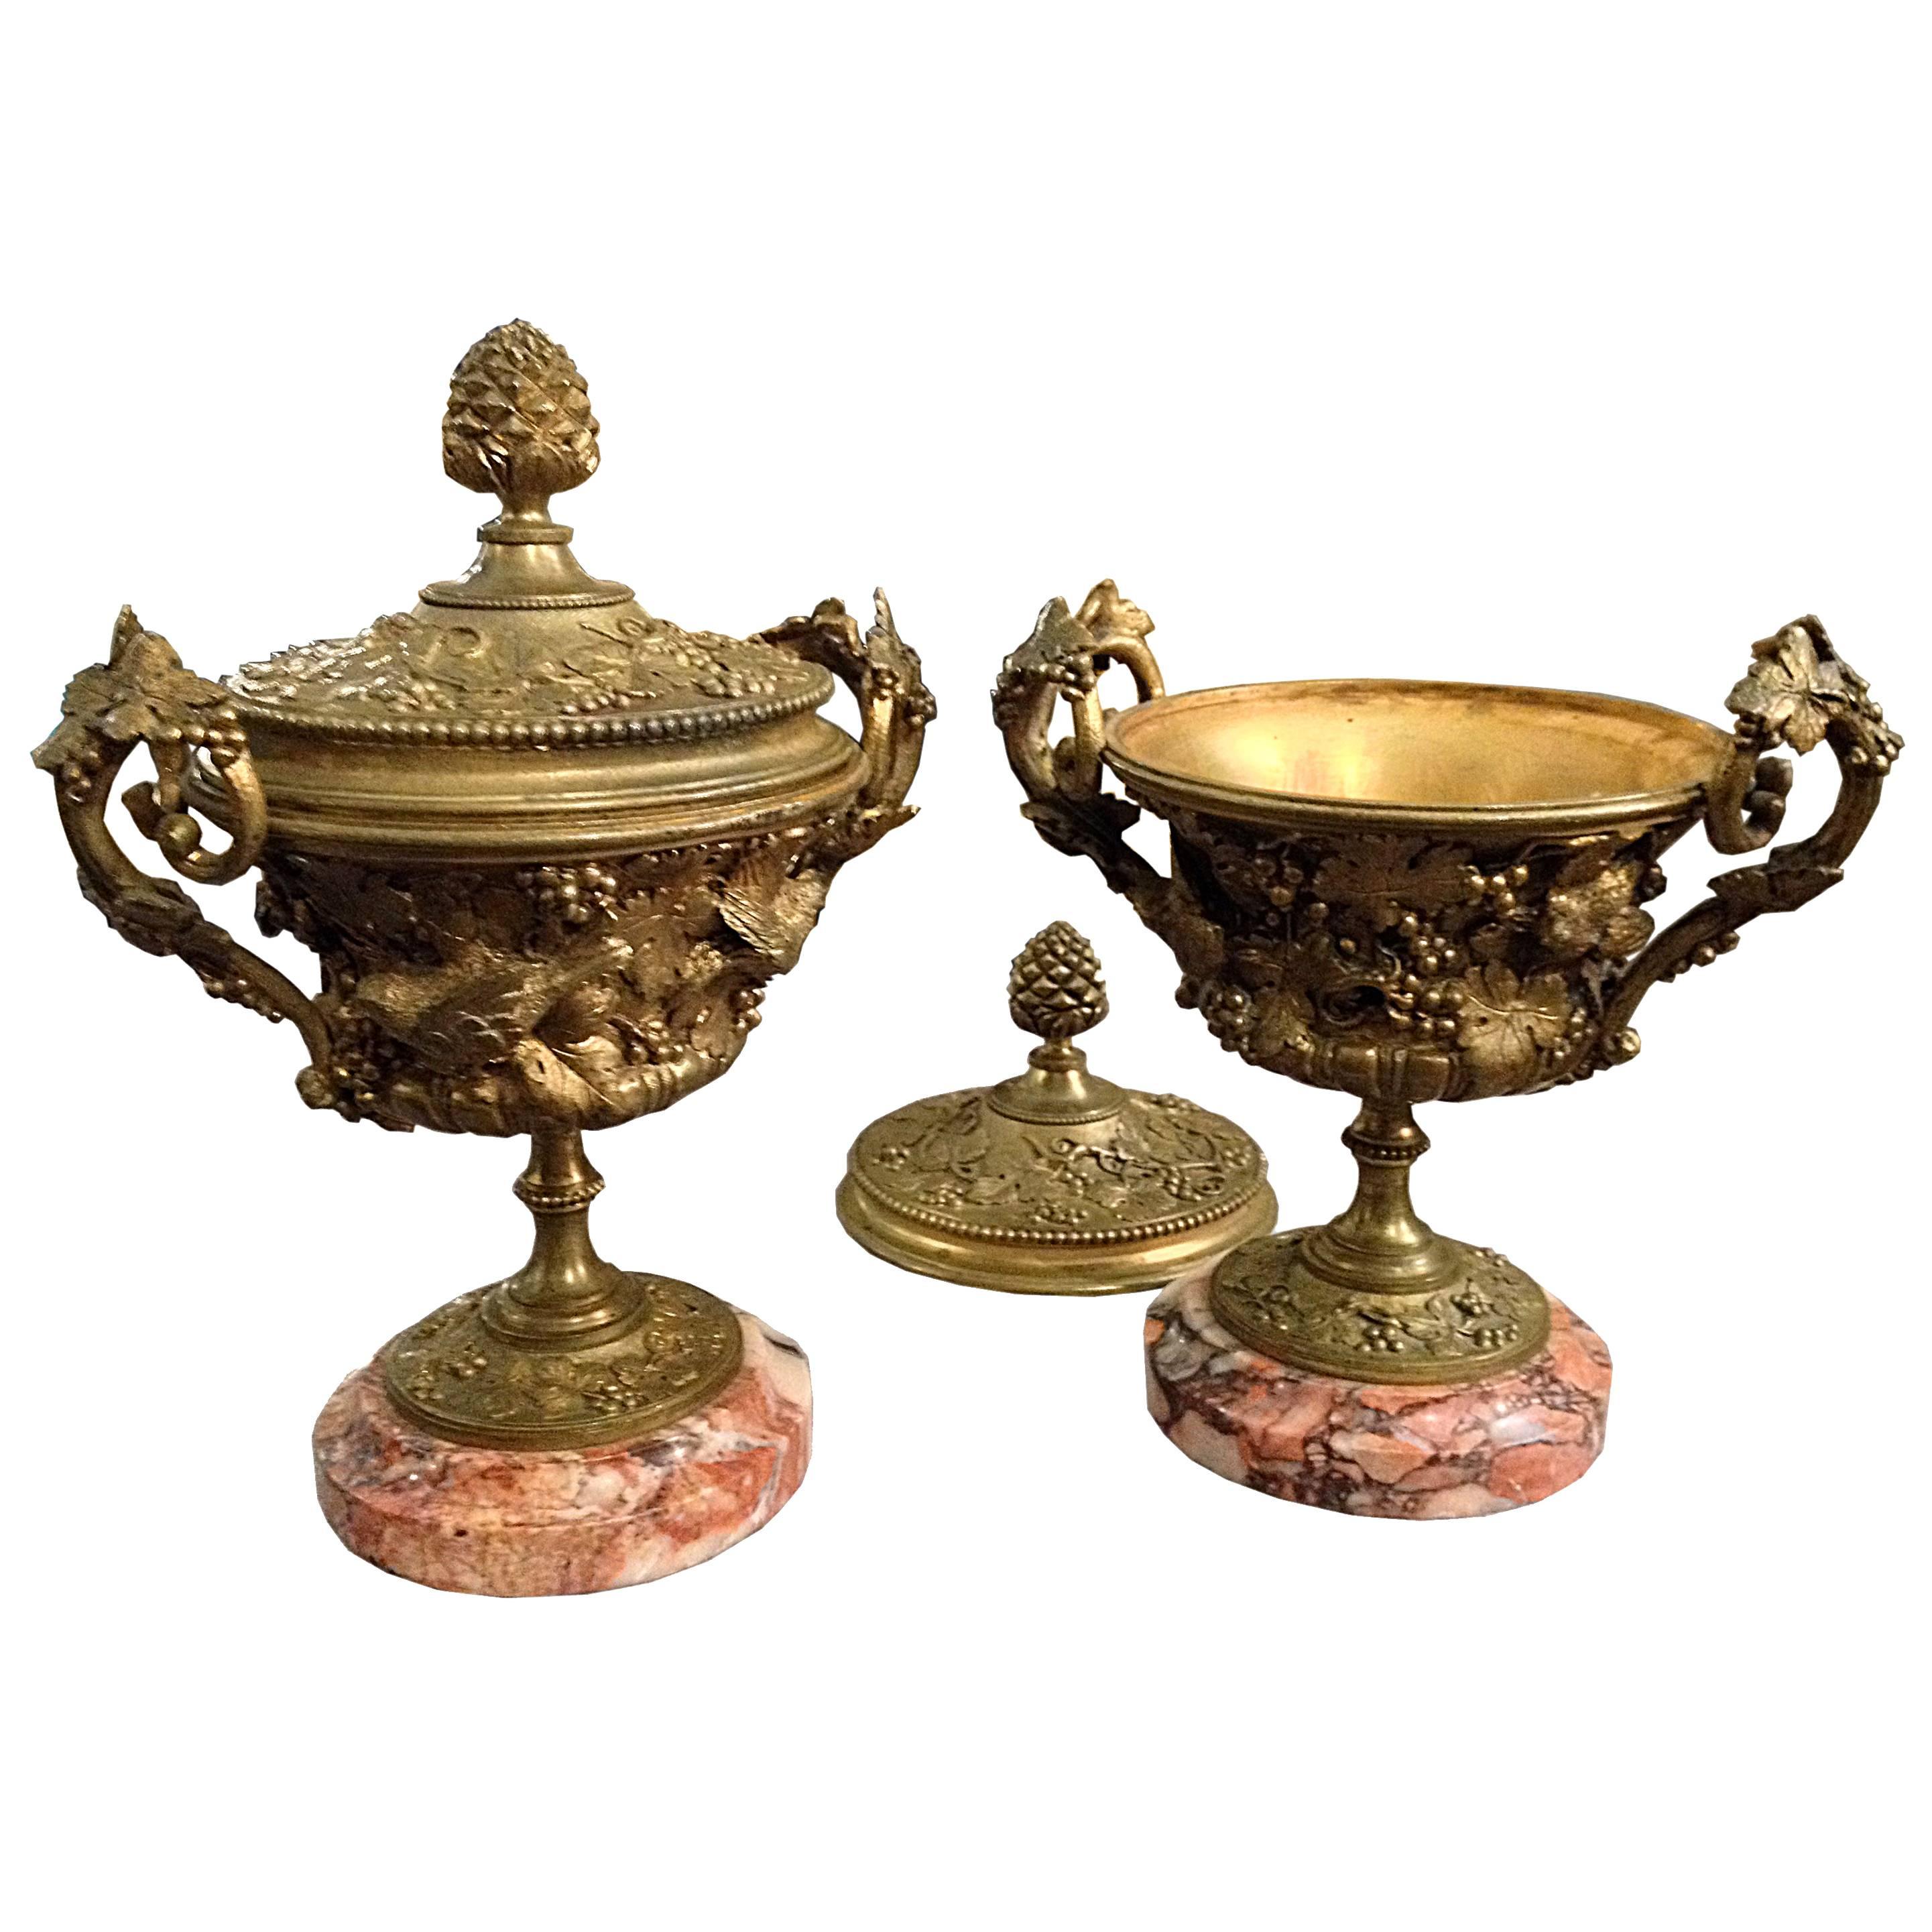 Pair of Decorative Brass Urns and Covers on Marble Bases